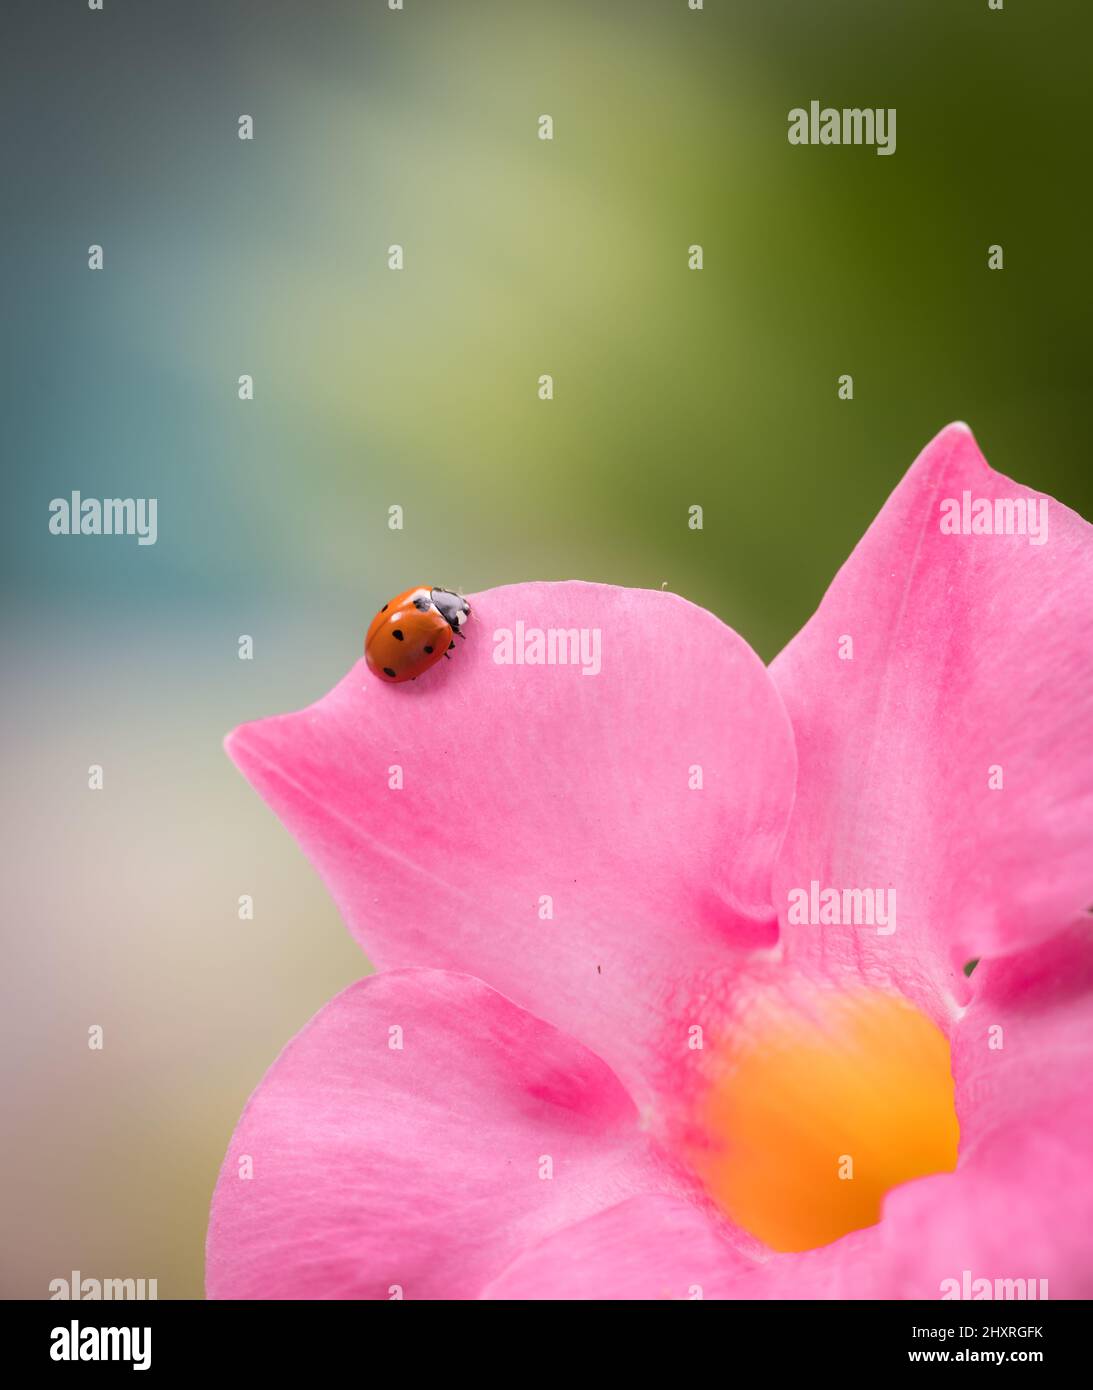 Macro shot of a ladybug on a pink mandevilla flower against a blurred background Stock Photo